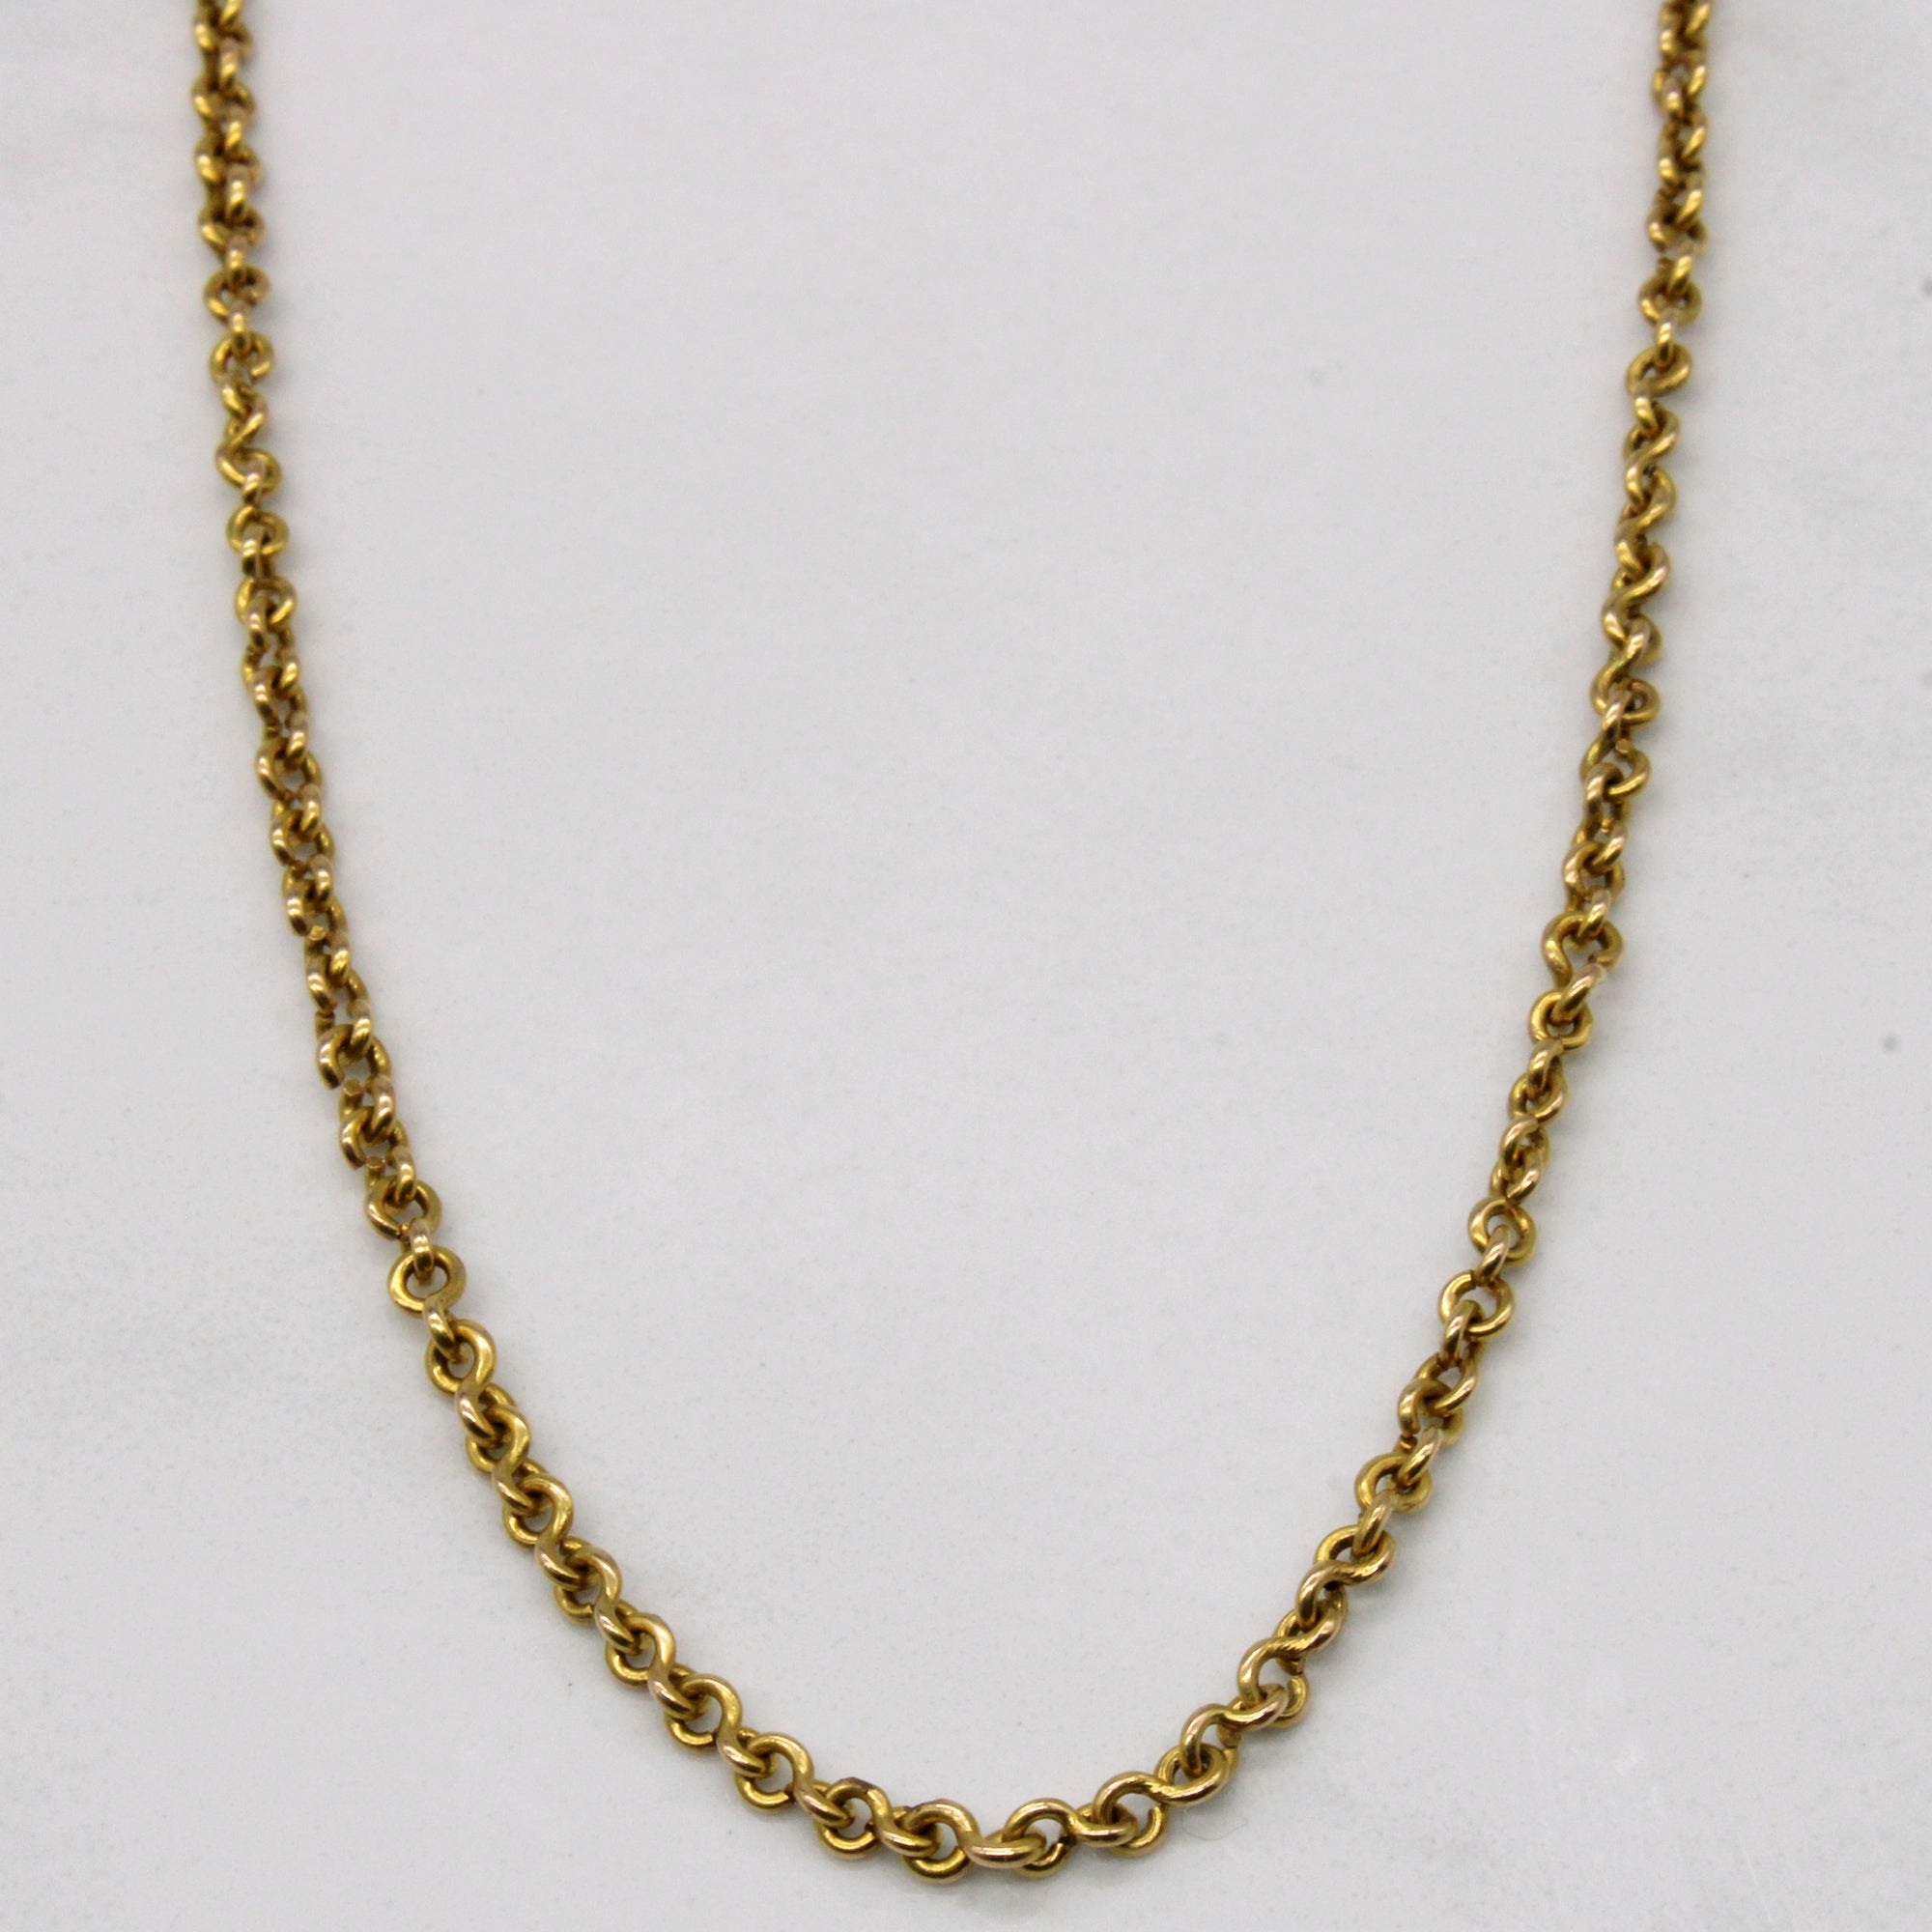 13k Yellow Gold Oval Link Chain | 21